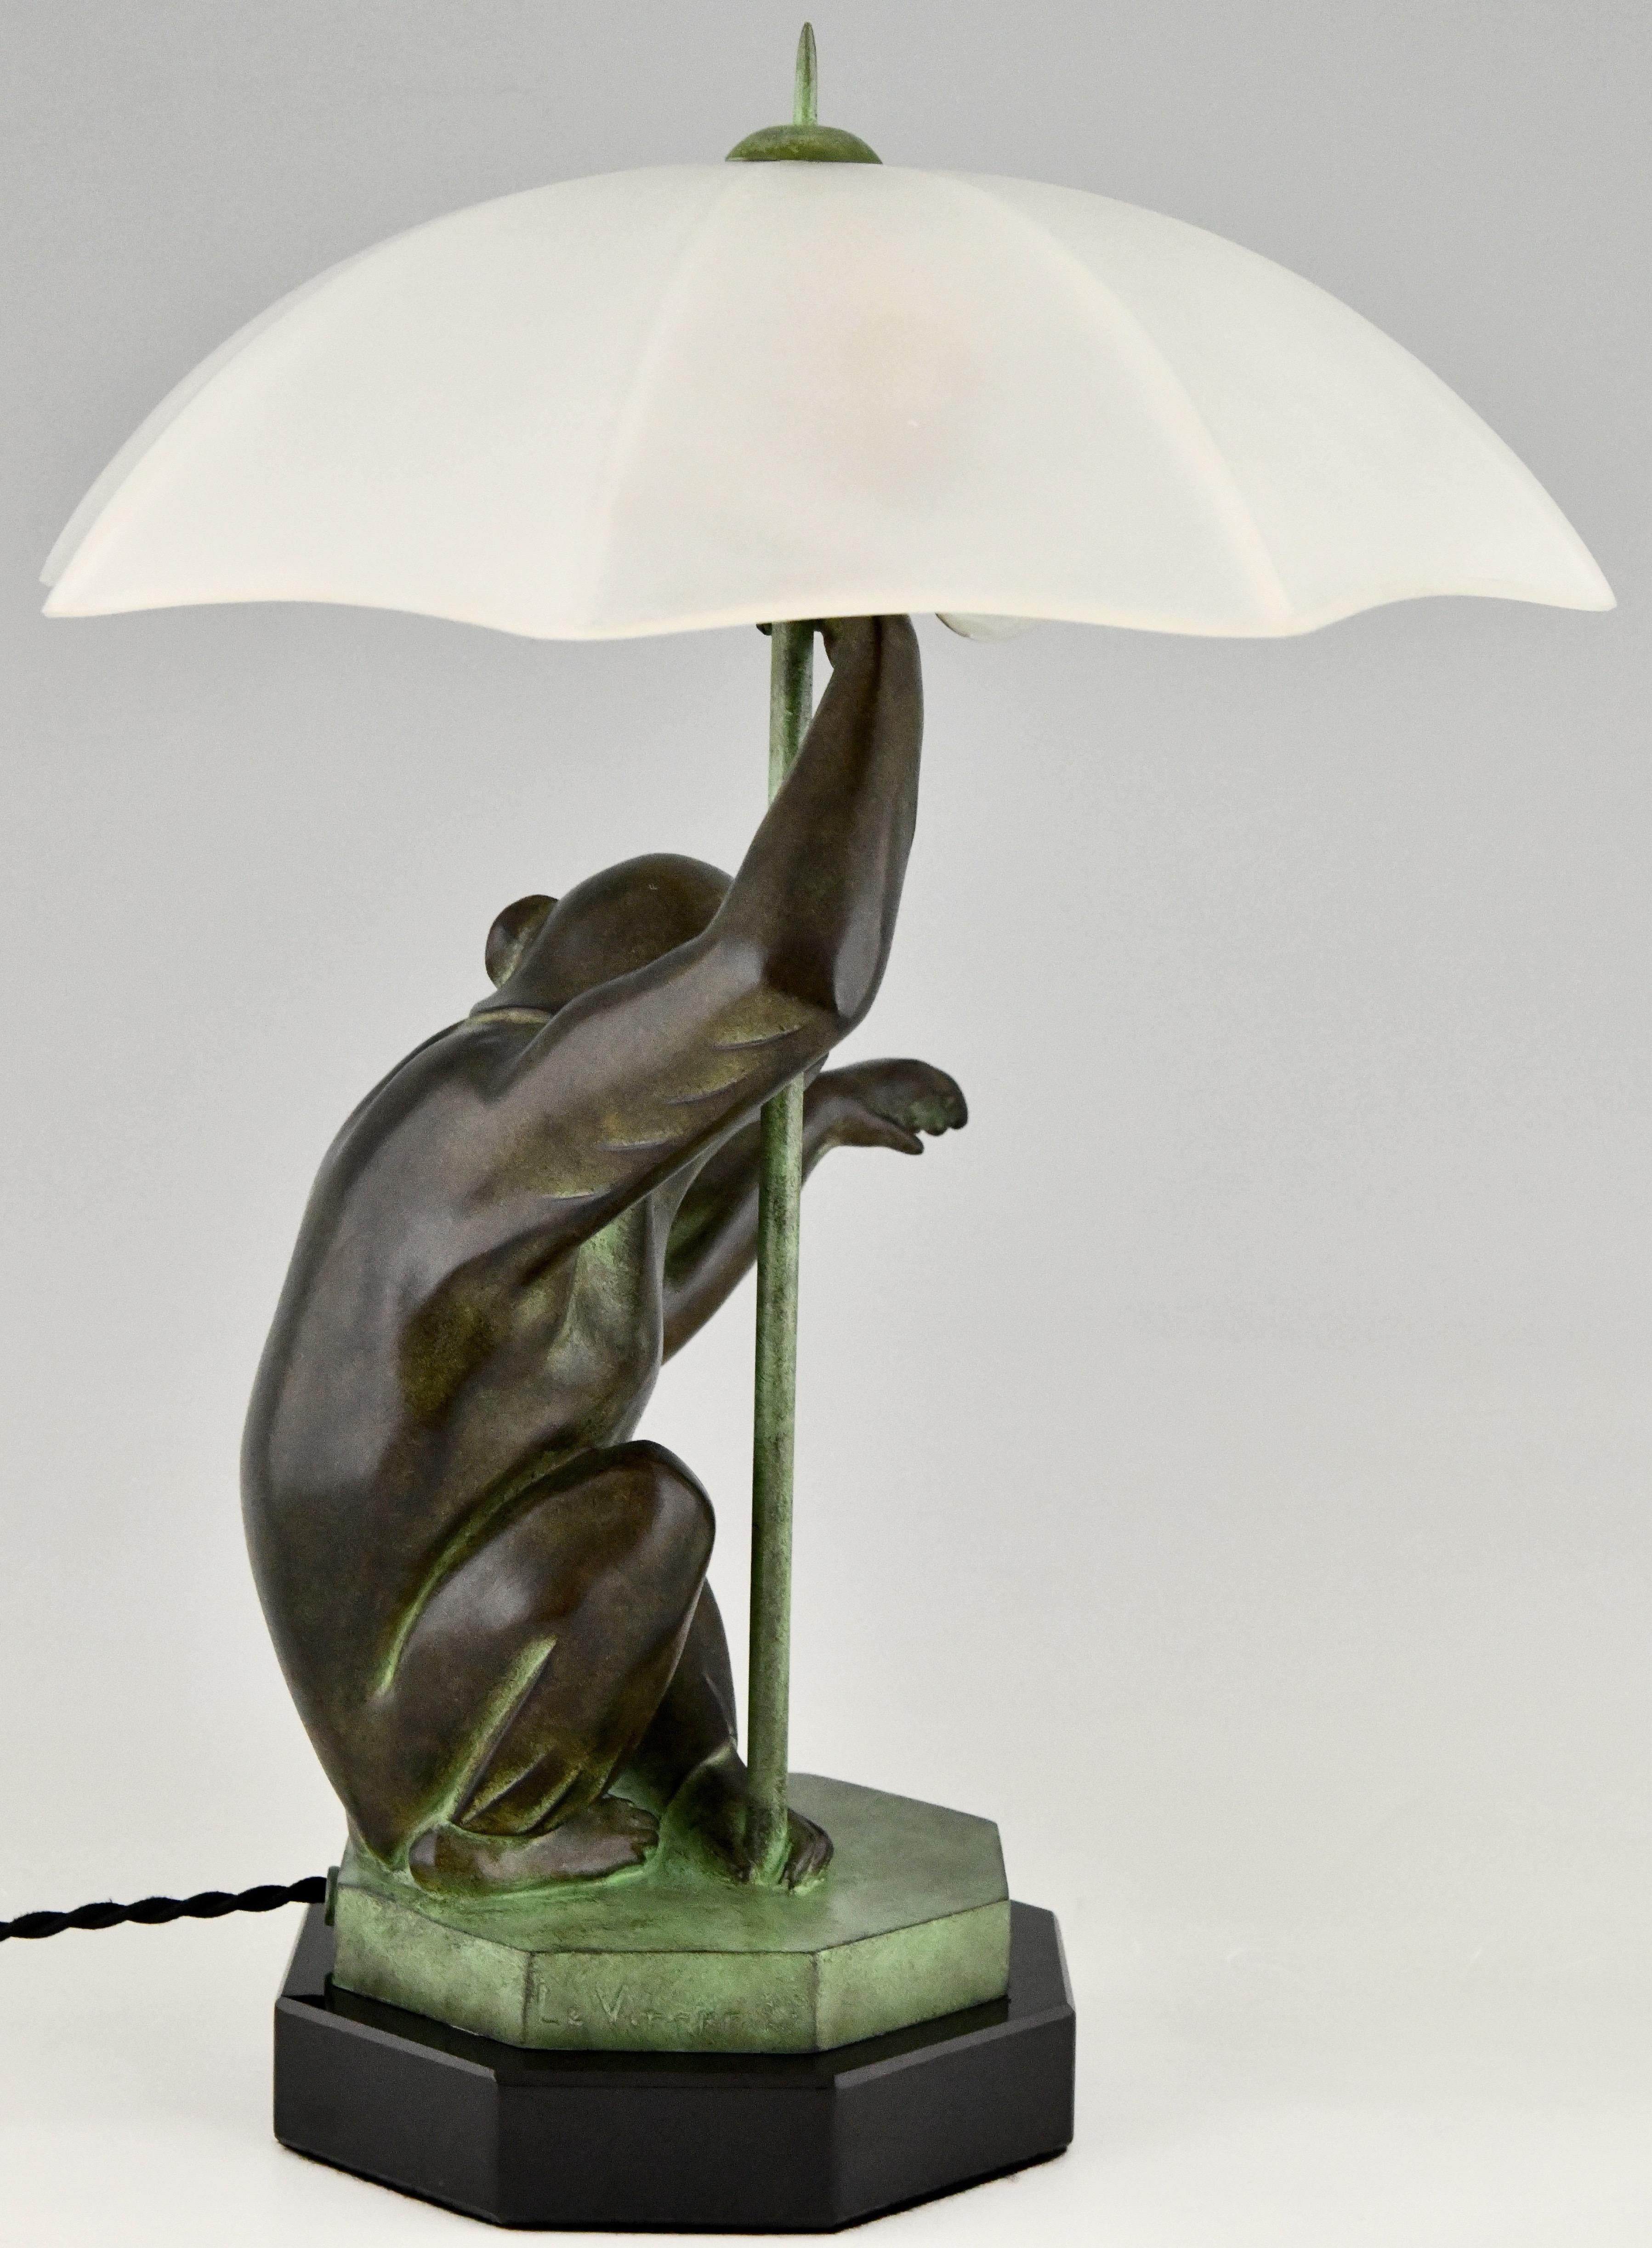 Hand-Crafted Art Deco Style Table Lamp Monkey with Umbrella by Max Le Verrier, France For Sale